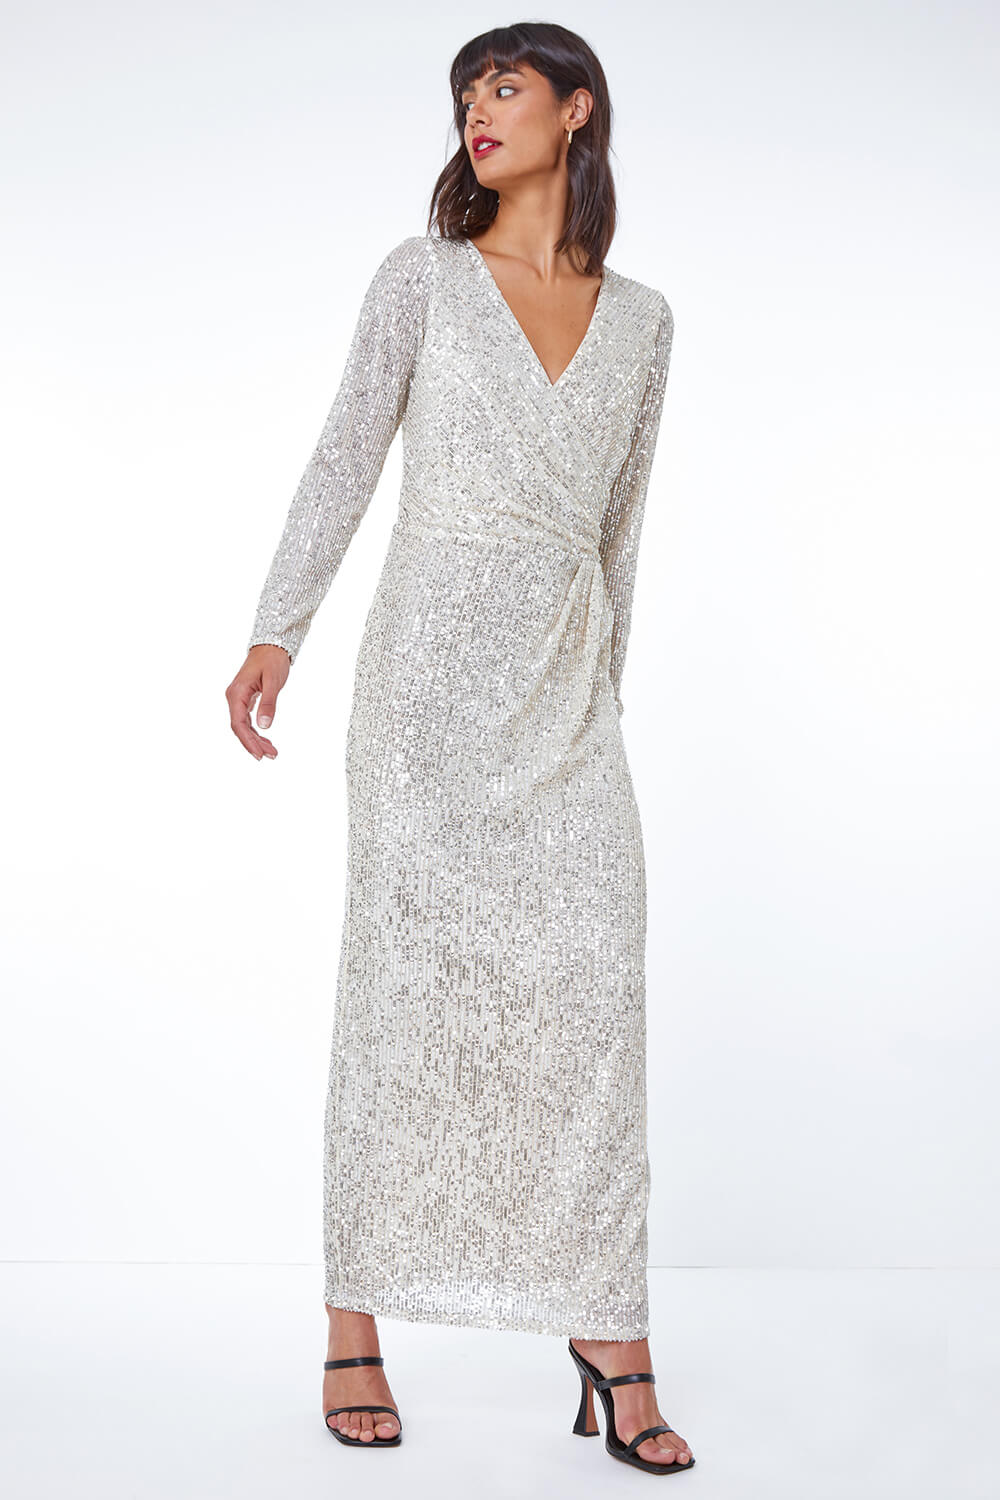 Silver Sequin Wrap Stretch Maxi Dress, Image 3 of 5